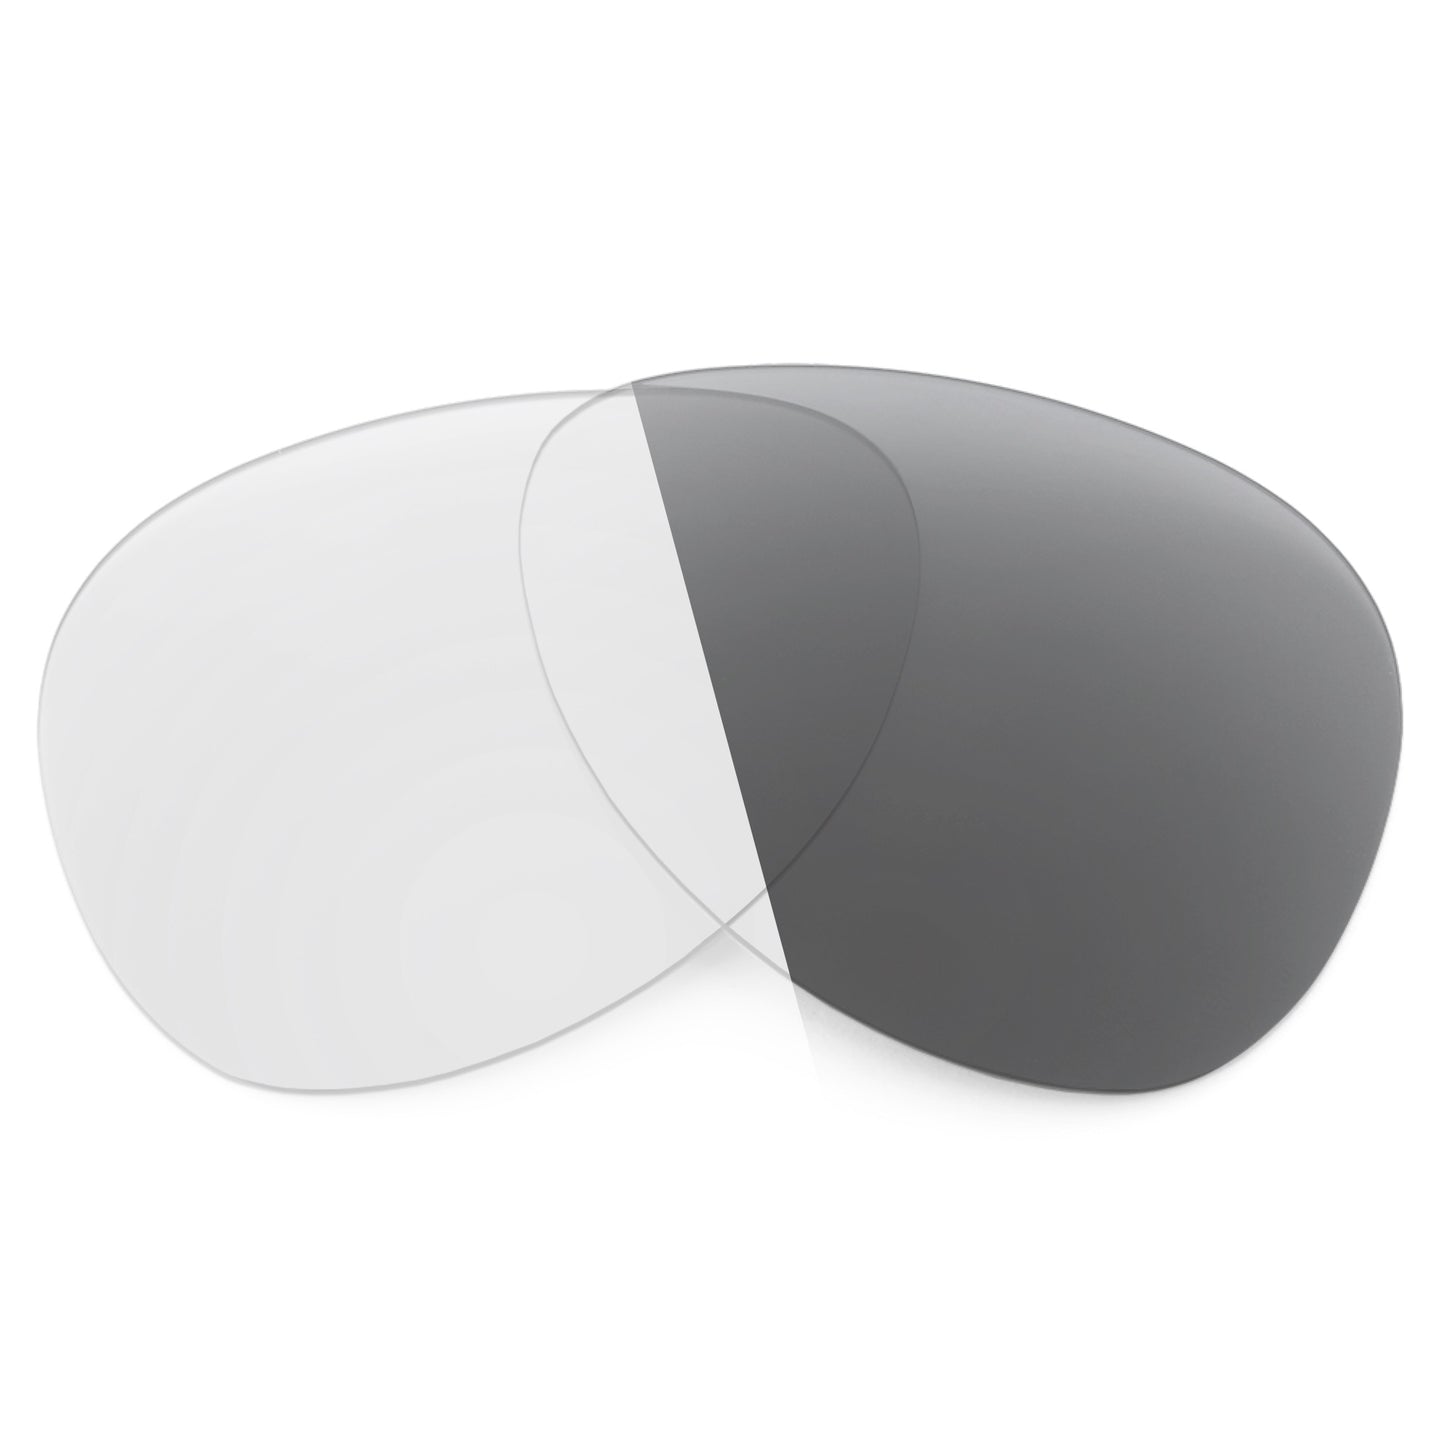 Revant replacement lenses for Ray-Ban Folding Aviator RB3479 55mm Non-Polarized Adapt Gray Photochromic